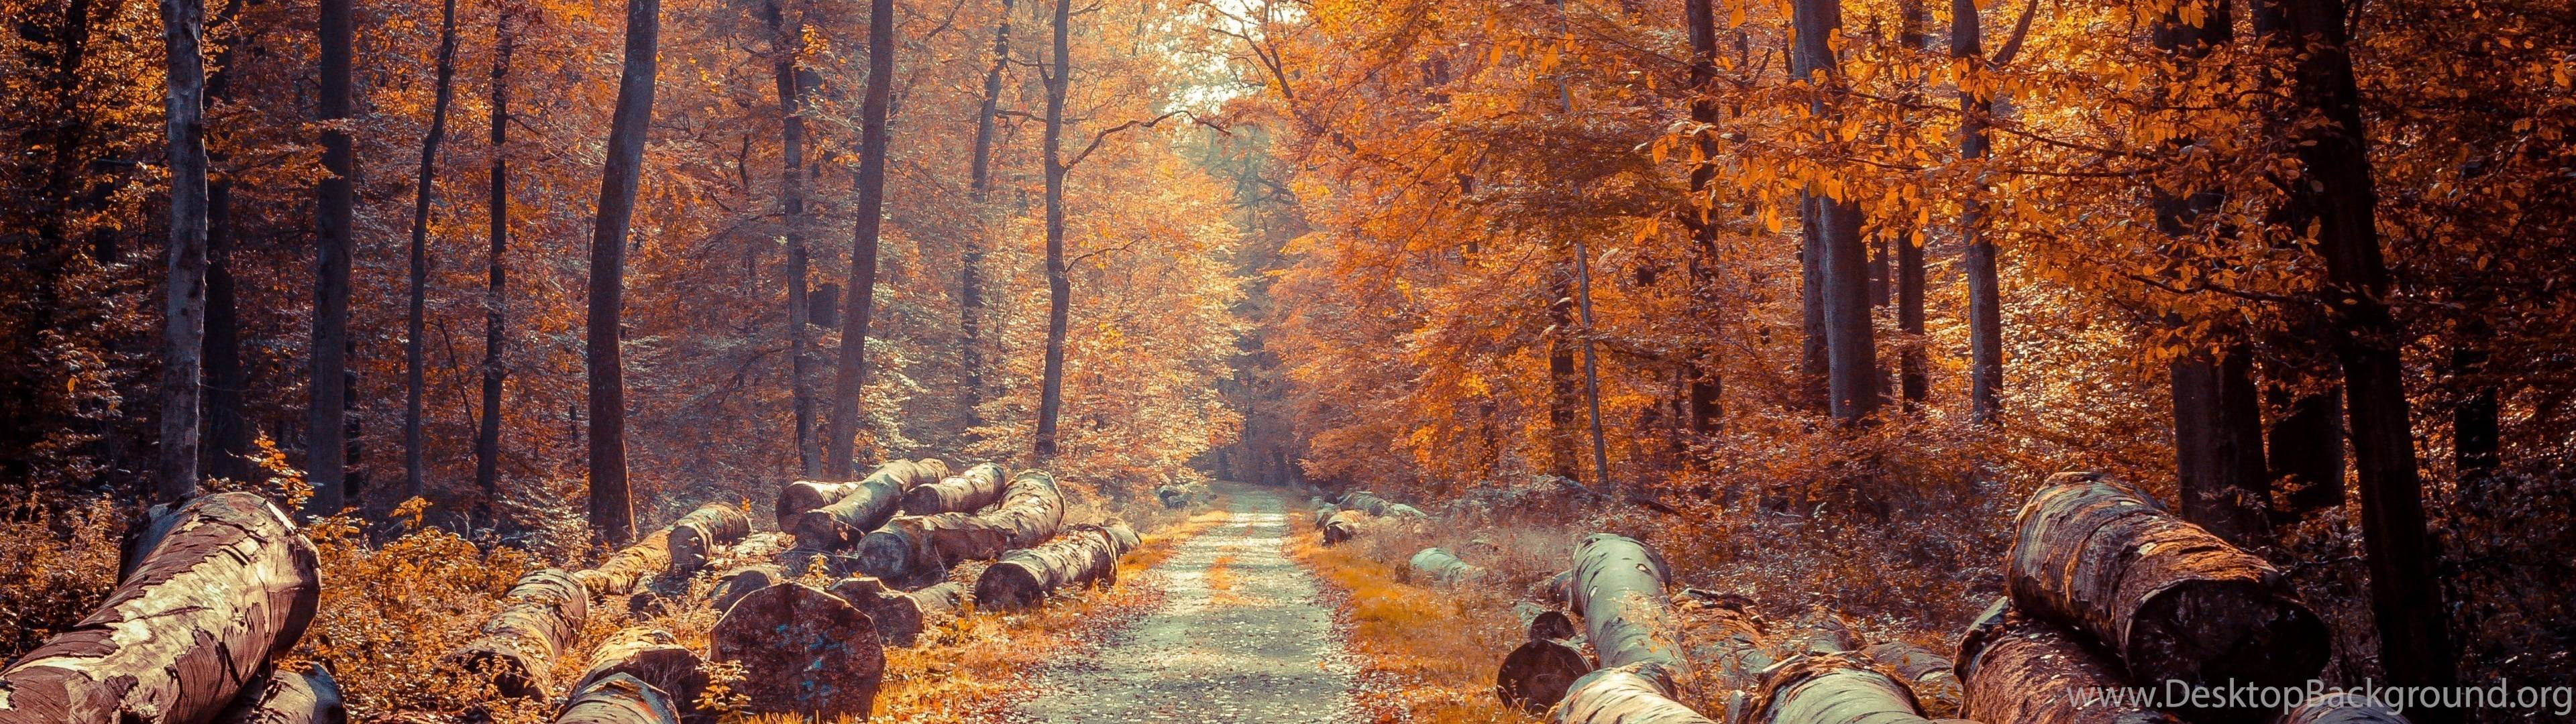 3840 X 1080 Autumn Wallpapers